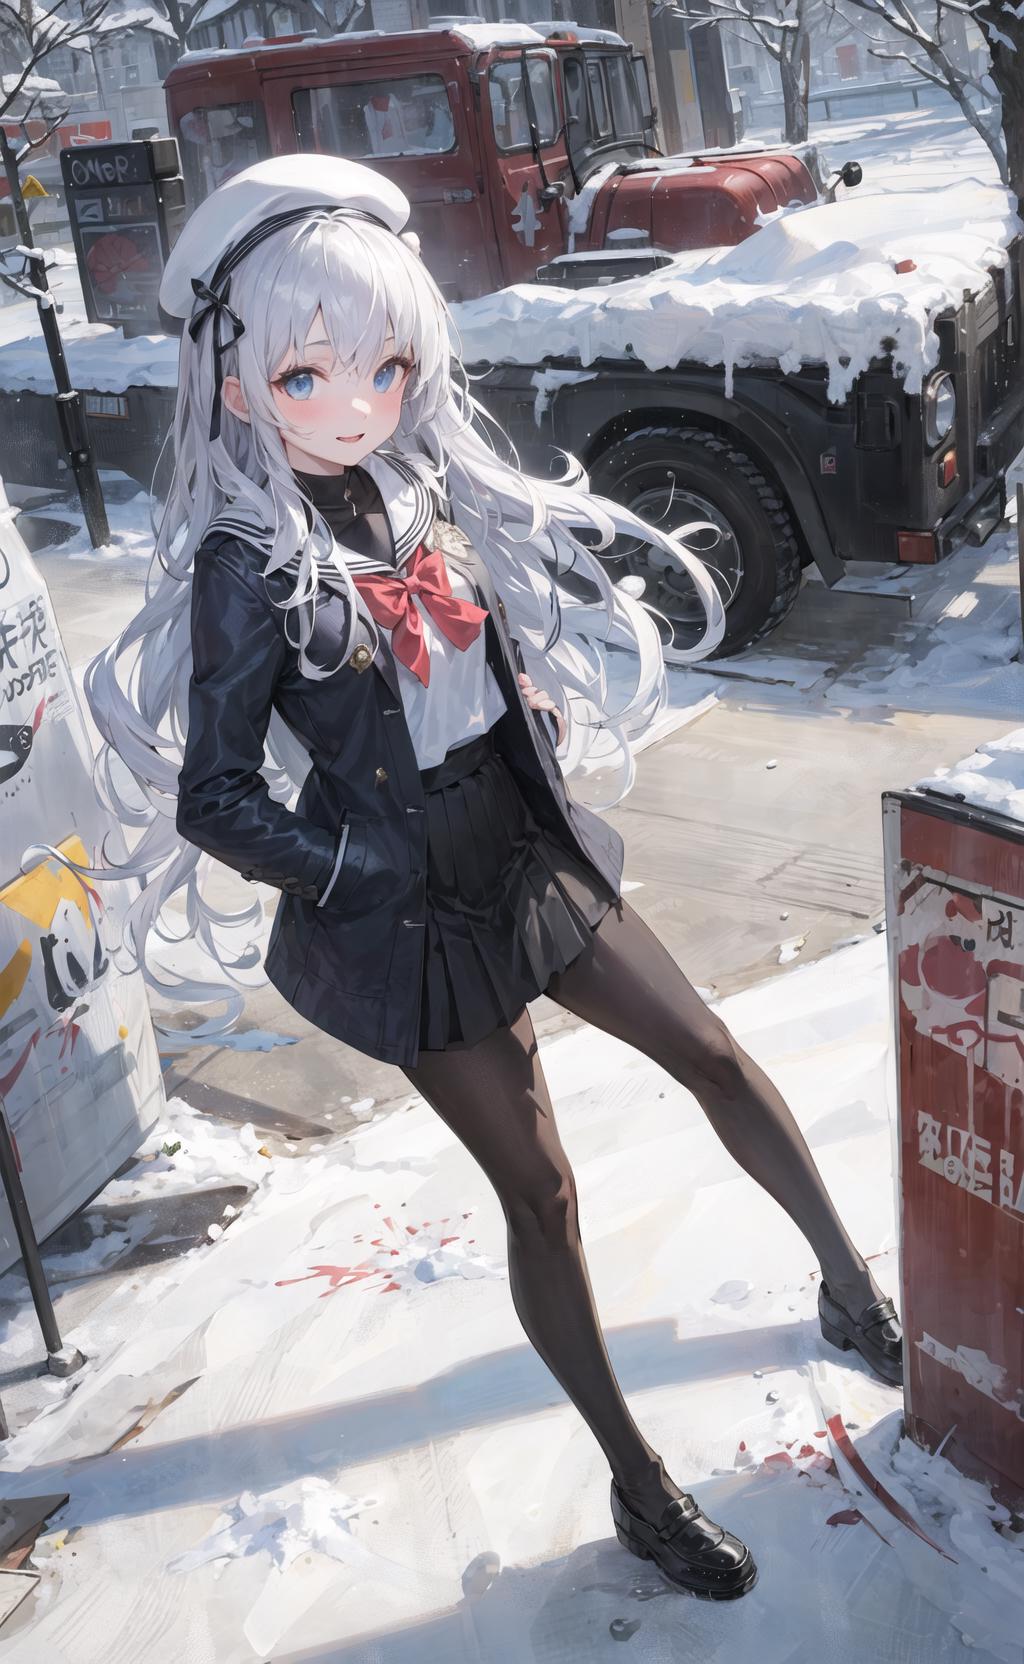 Anime Character in a Snowy Scene with a Red Bow in Her Hair